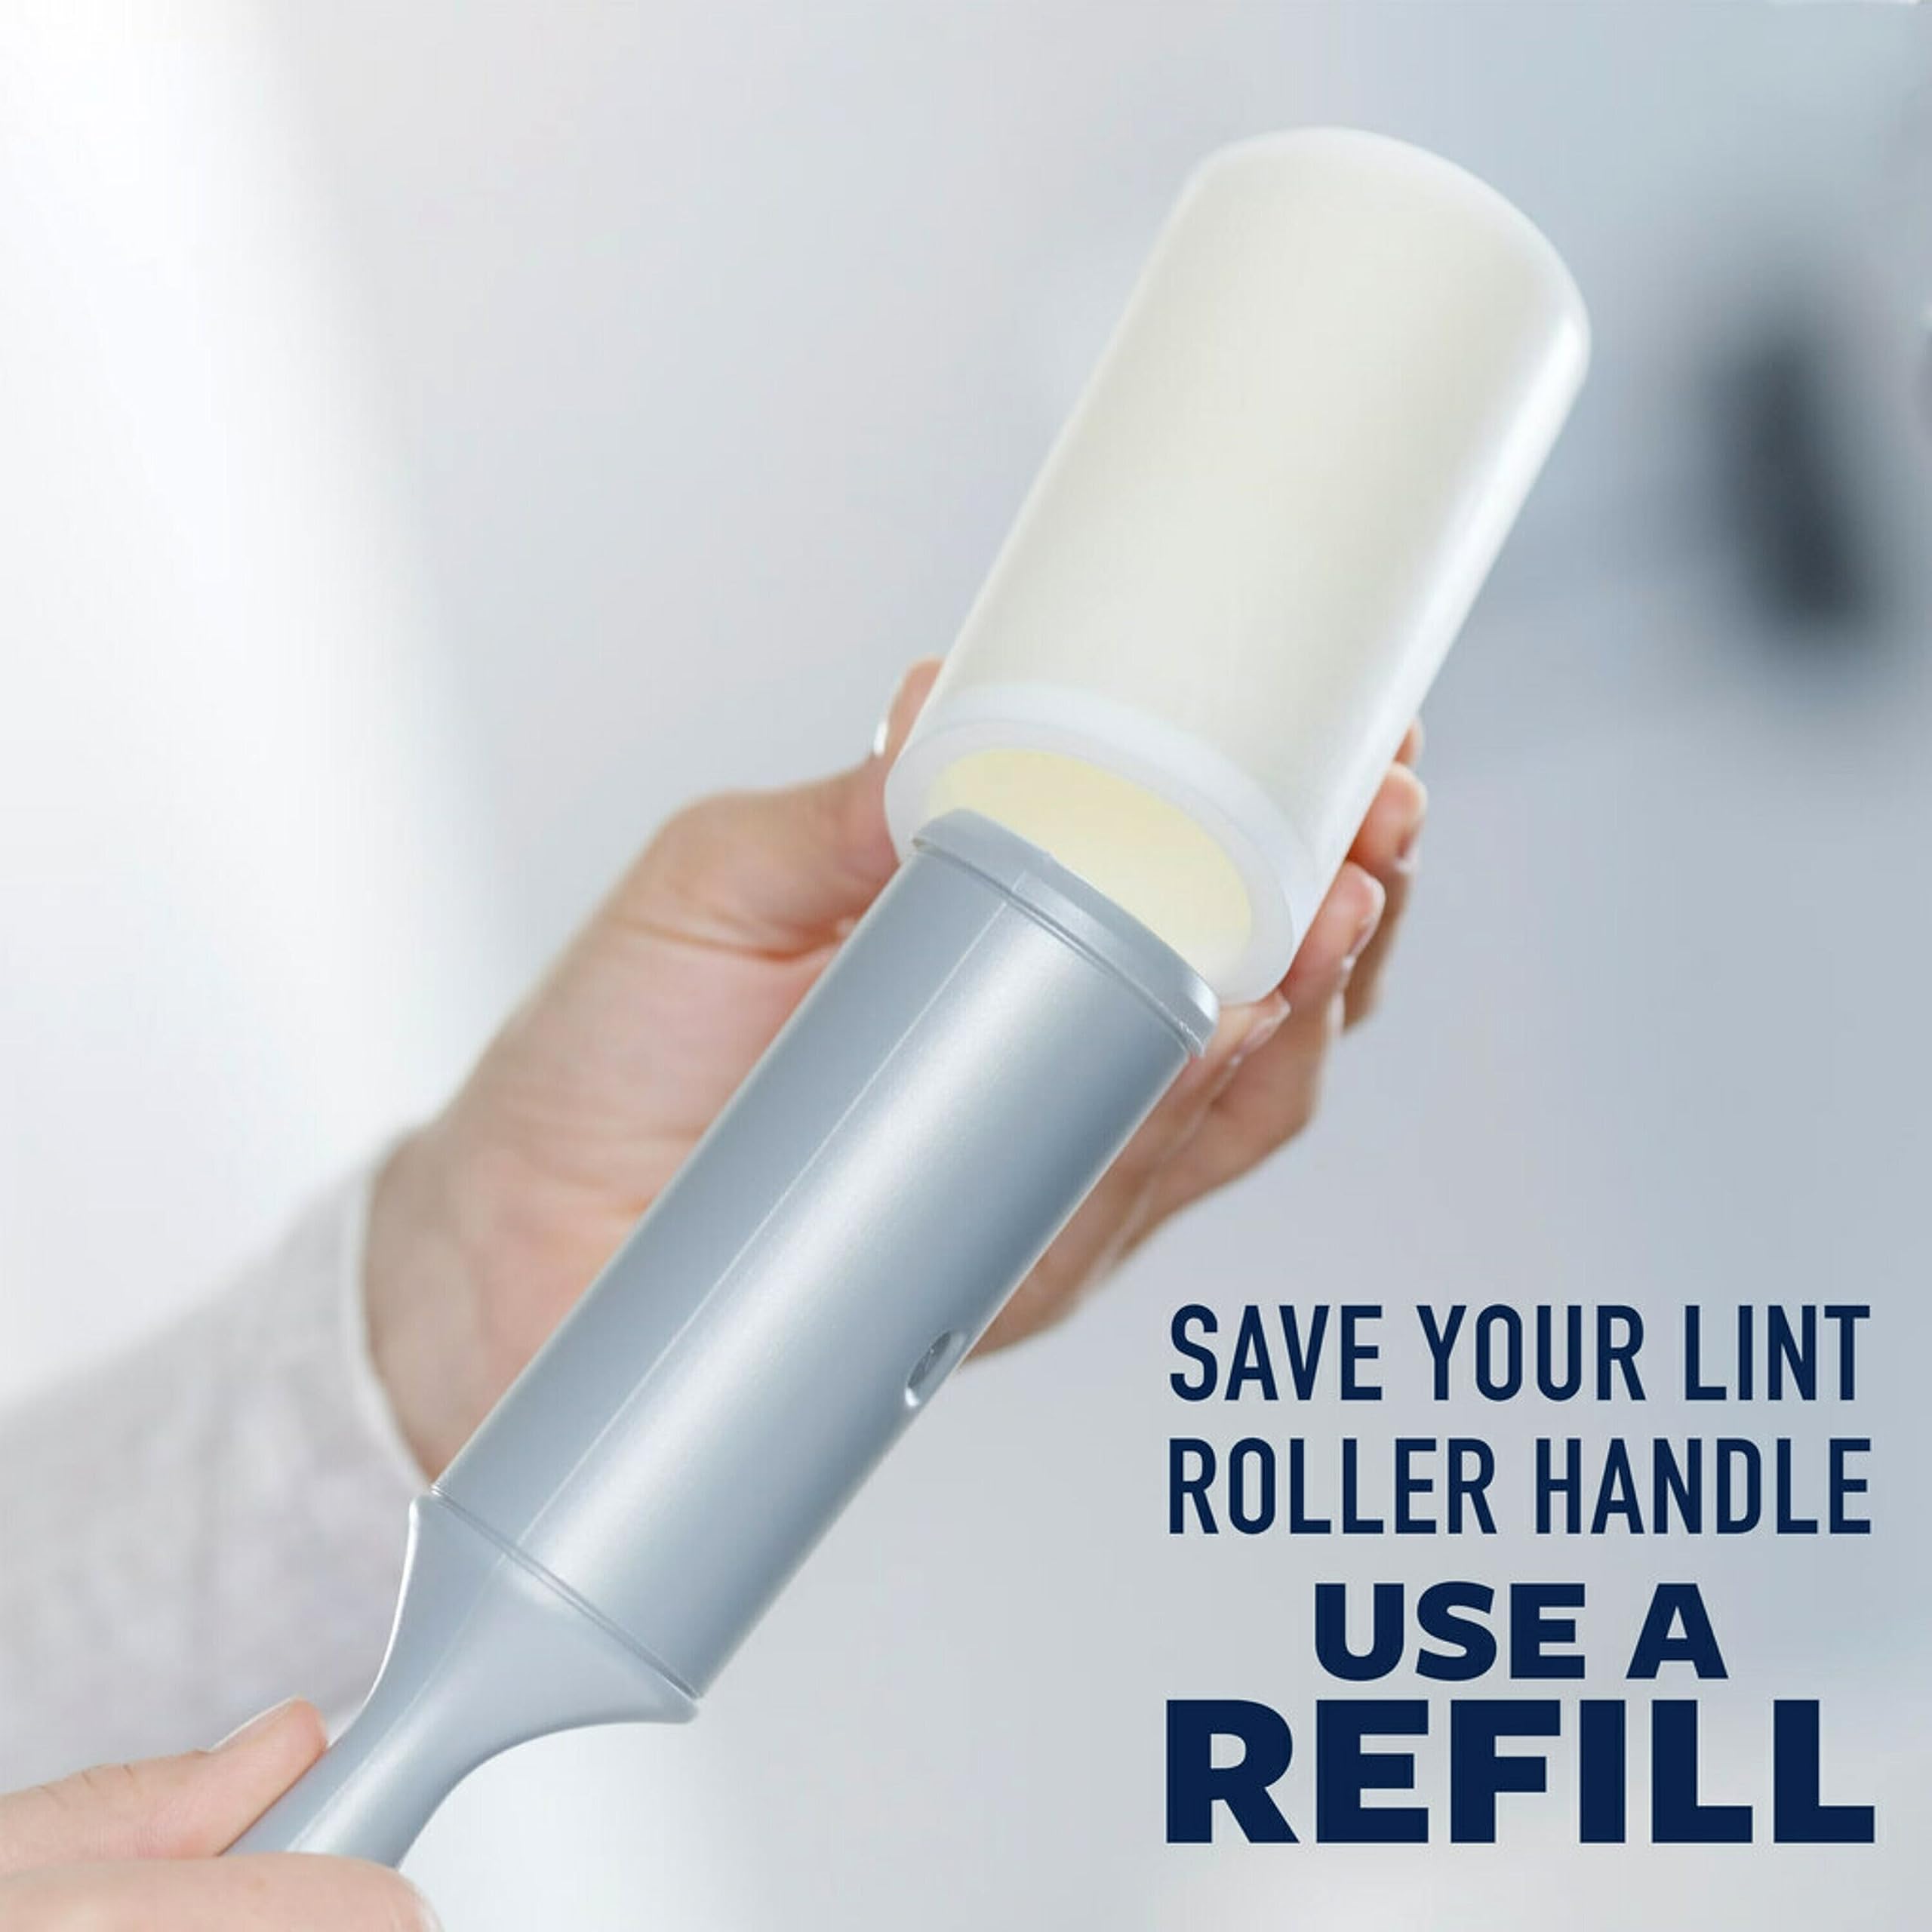 Scotch-Brite Lint Roller Twin Pack, Works Great On Pet Hair, 2 Rollers, 70 Sheets Per Roller